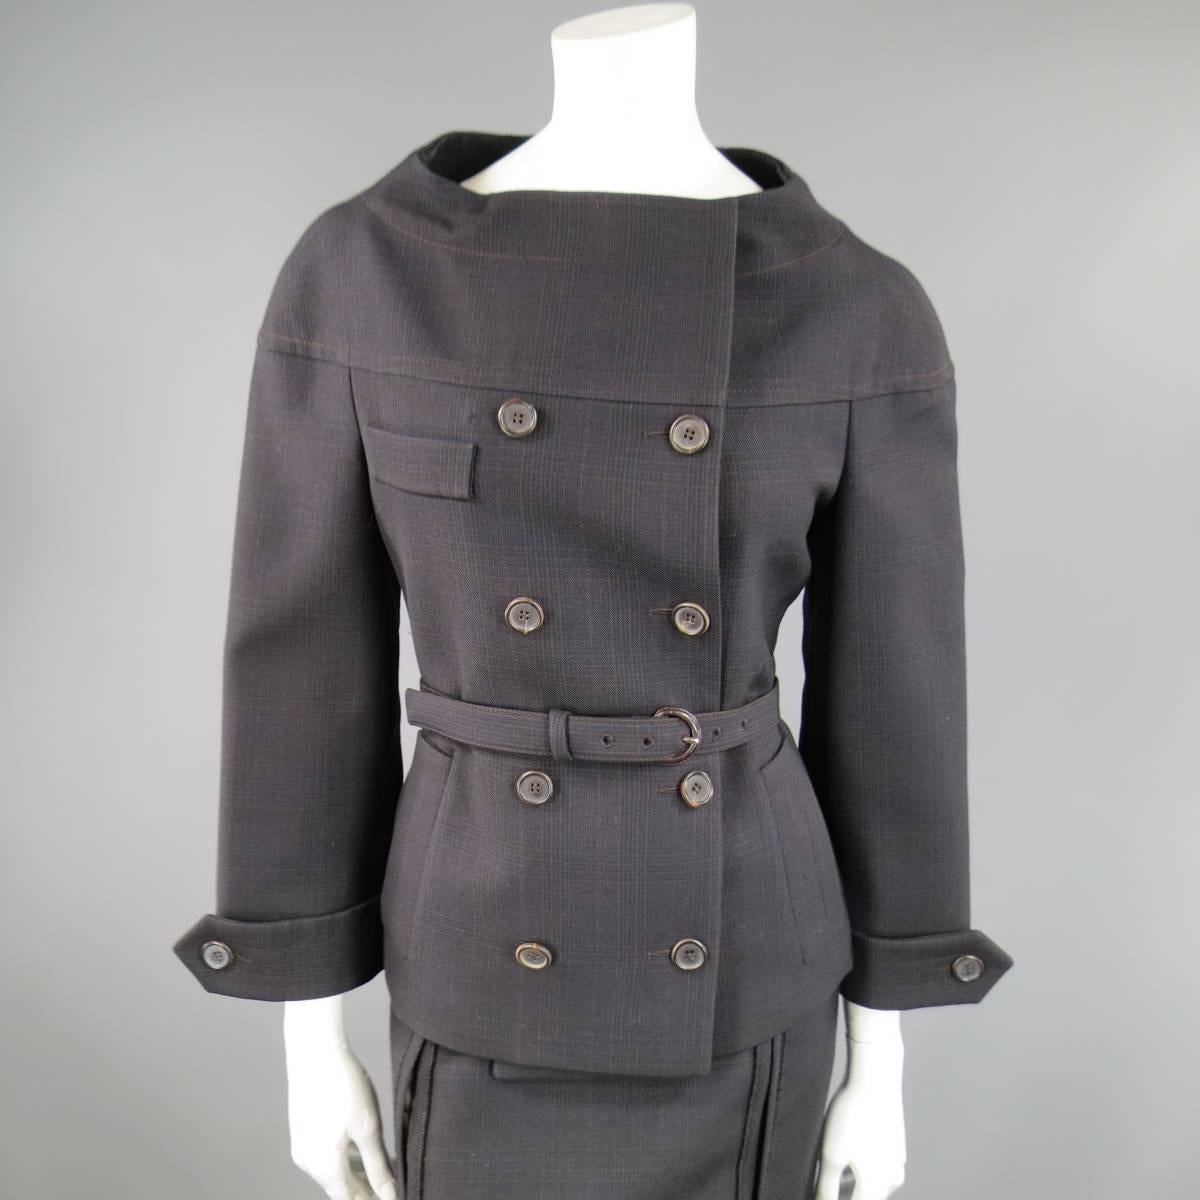 This fabulous 1960's inspired PRADA suit includes a jacket in a dark brown and navy blue plaid wool and features a button up double breasted closure, double side pockets , belted waist, sleeve epaulets, and high curved neckline with a matching raw